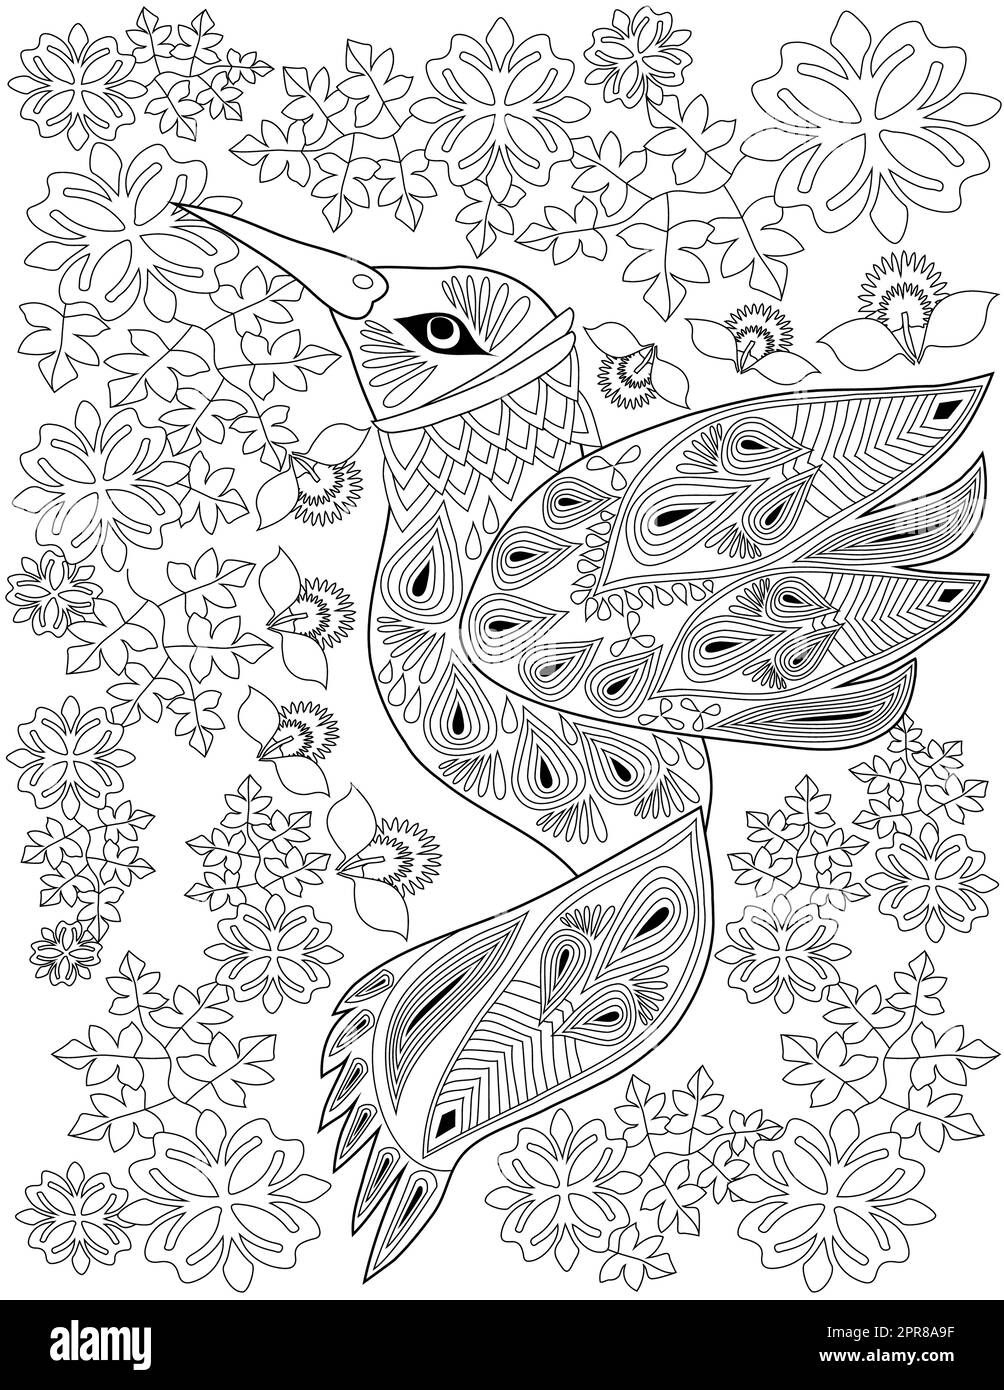 Coloring Book Page With Beautiful Bird With Different Flowers In Background Stock Photo